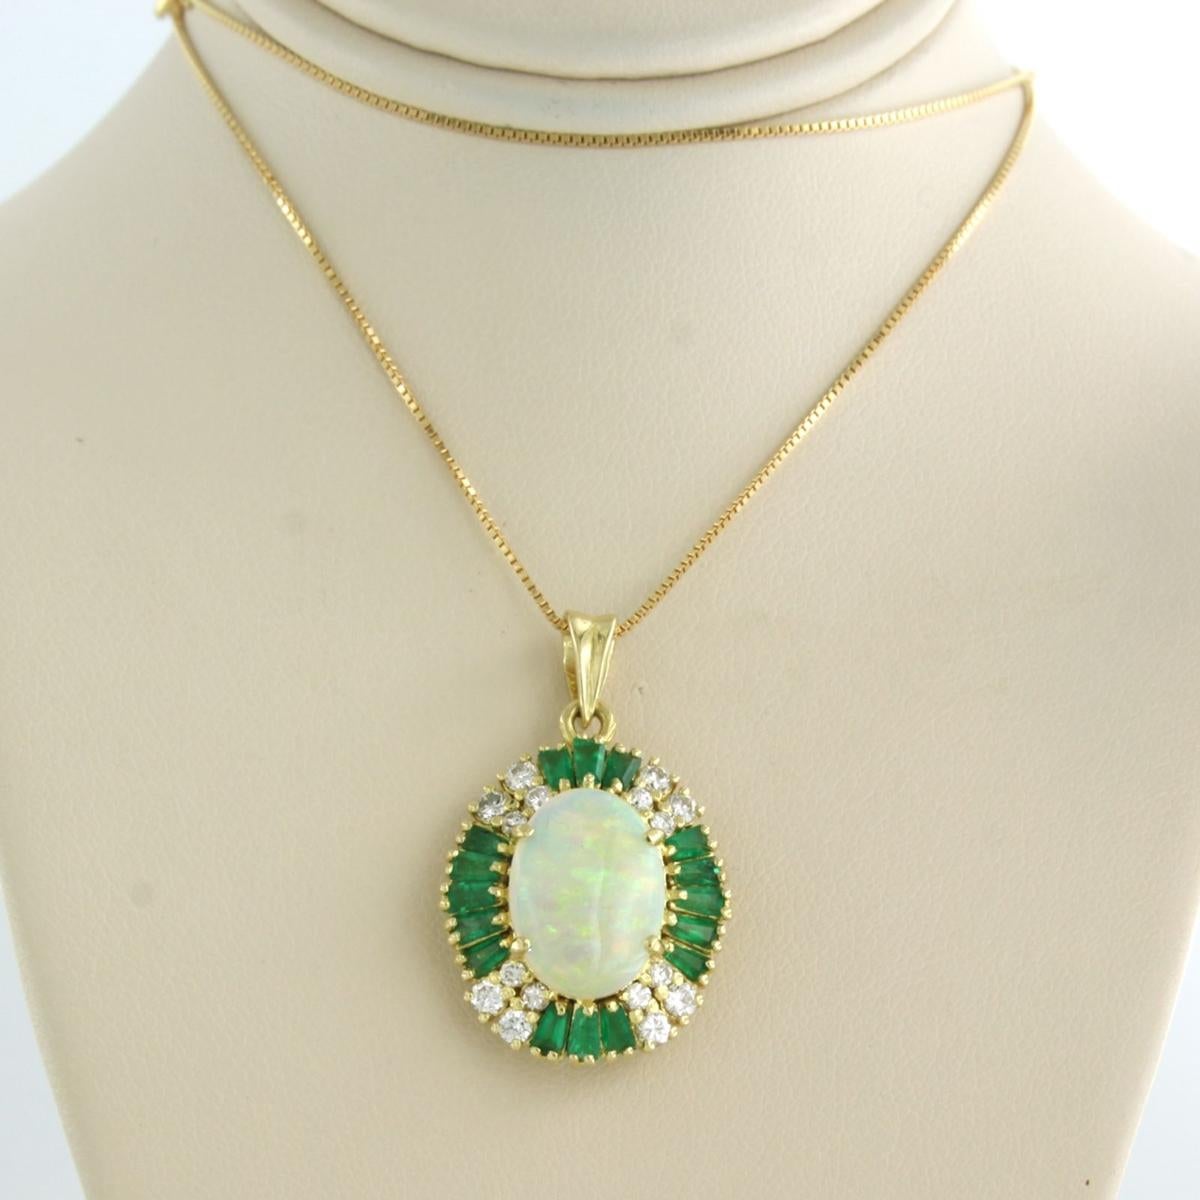 18 kt yellow gold necklace with pendant set with opal, emerald and brilliant cut diamond to. 0.50ct F/G - VS/SI - 45 cm long

detailed description:

the size of the pendant is 3.0 cm long by 1.9 cm wide.

length of the necklace is 45 cm long and 0.7